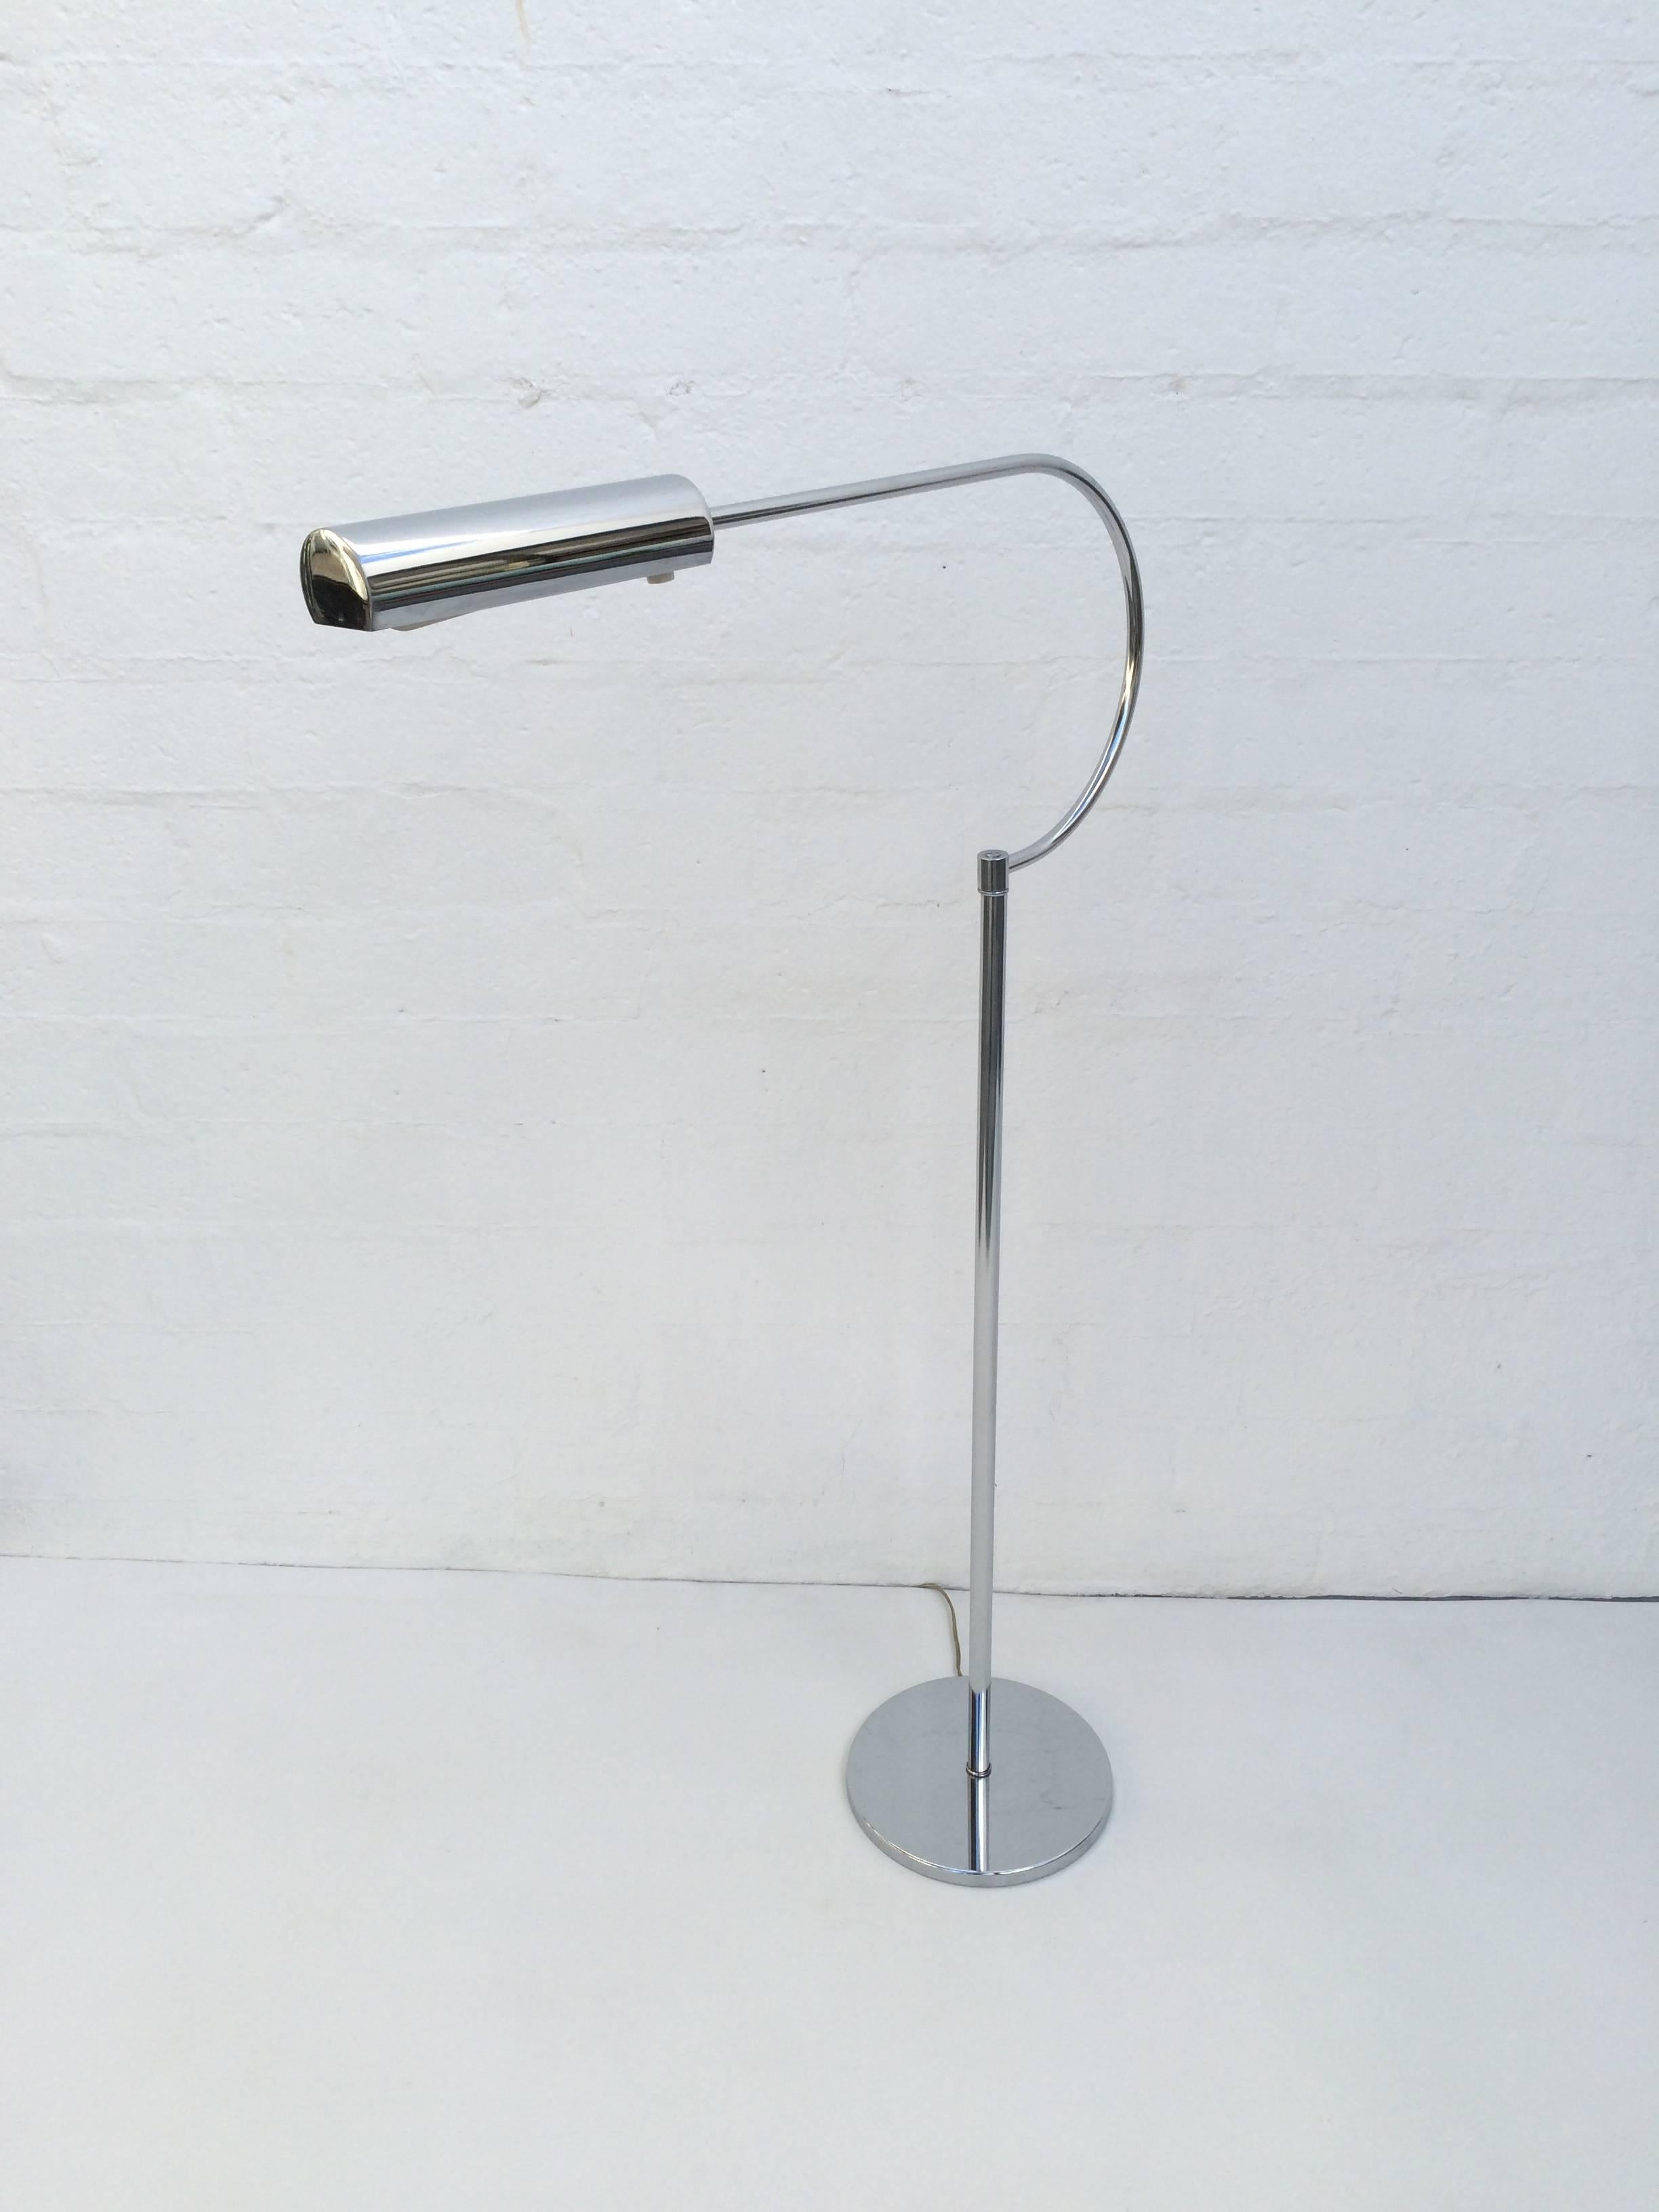 Stunning Italian polished floor lamp made by Raymor. 
These rare lamps don't come up for sale very often. 
Newly rewired. 
Unique in its design, this lamp can add drama to a sitting area or office.